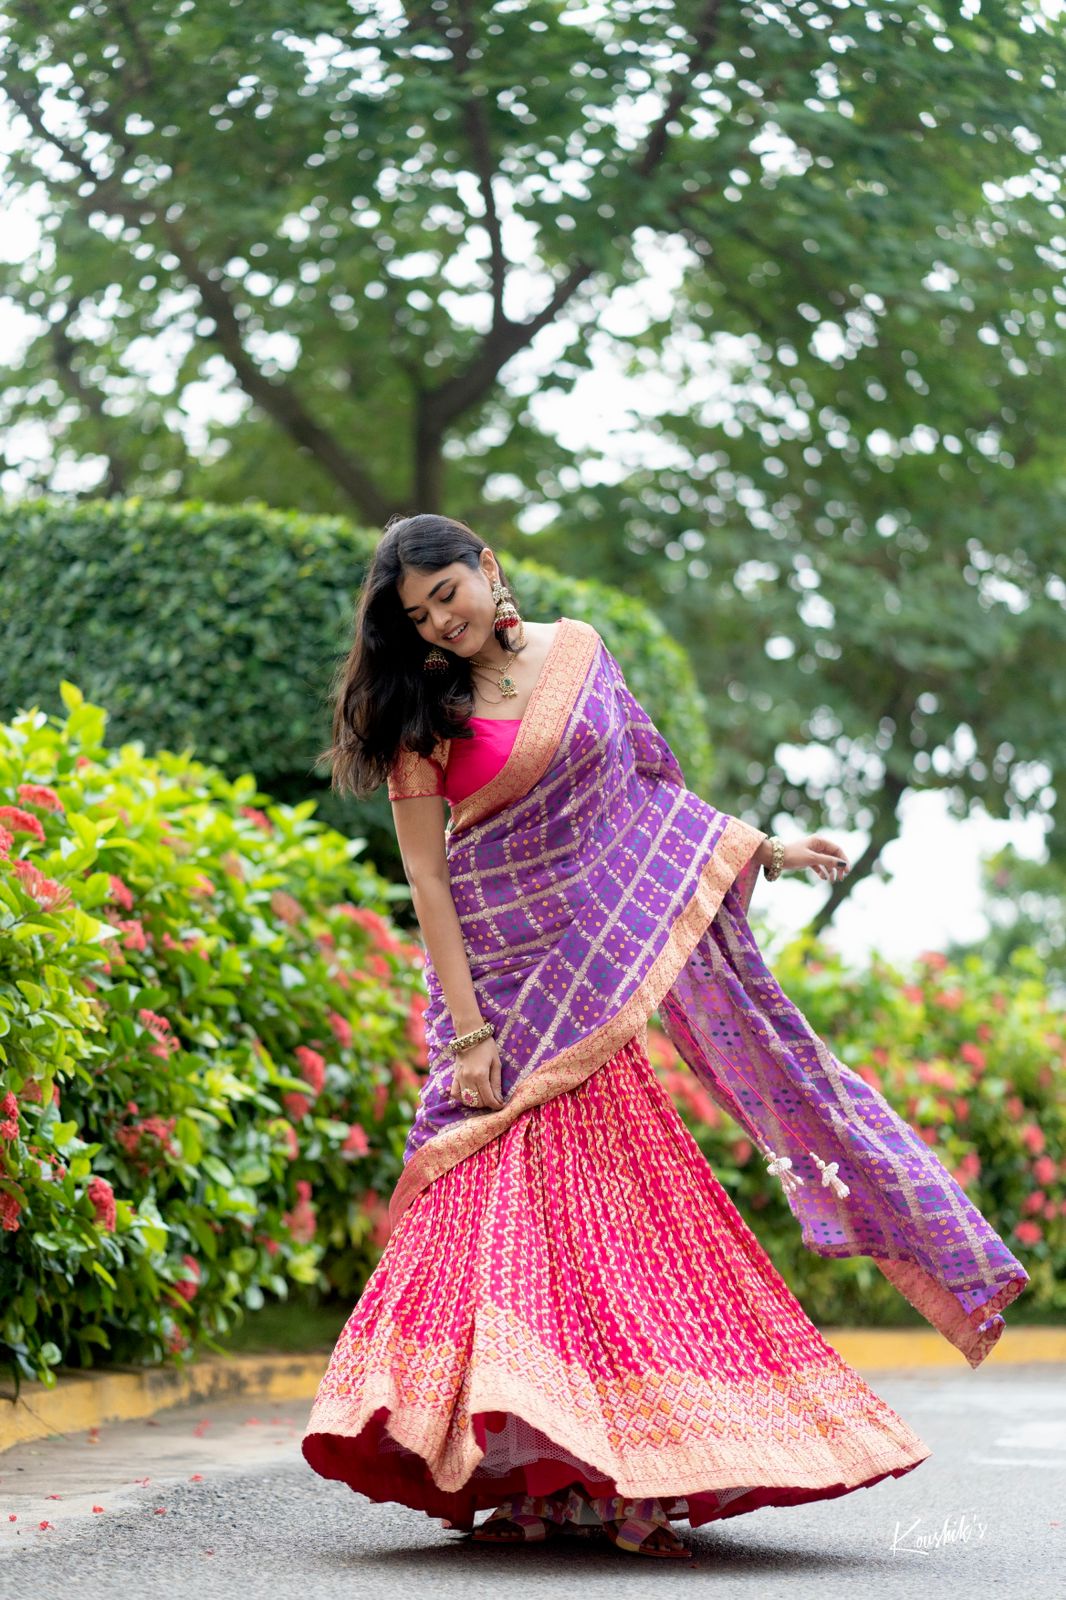 Variant of Pink Bandani Lehenga presented, highlighting a different shade and pattern in Bandani style, expanding pink color choices.